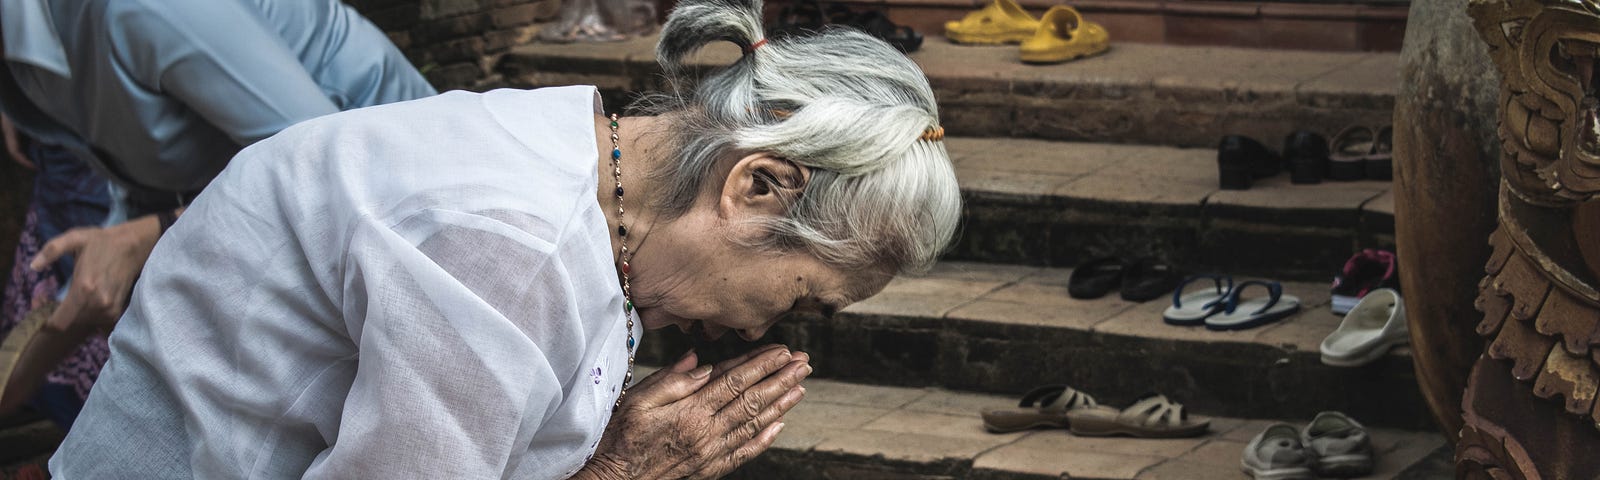 An elderly woman bowing with hands clasped in prayer outside a place of worship